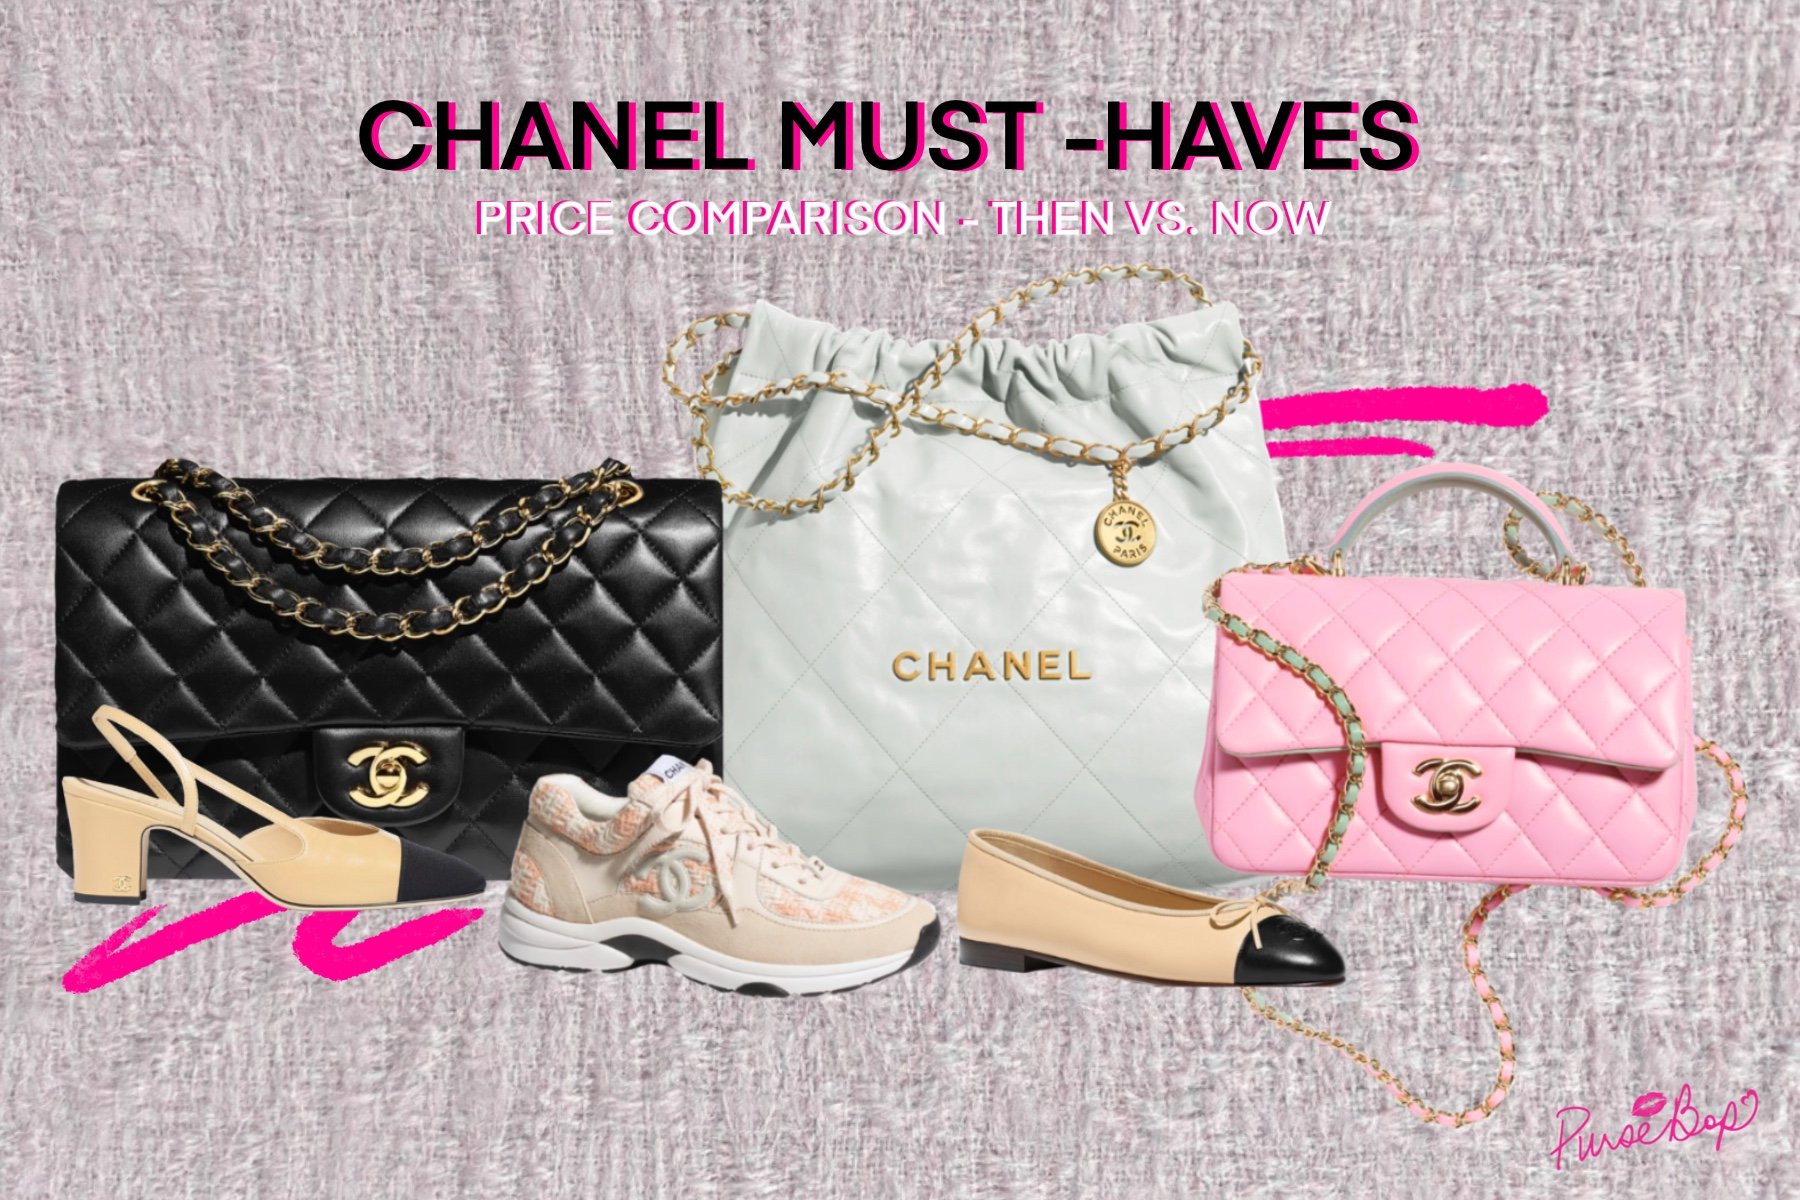 Chanel's $10,000 Handbags May Become Even Pricier in September